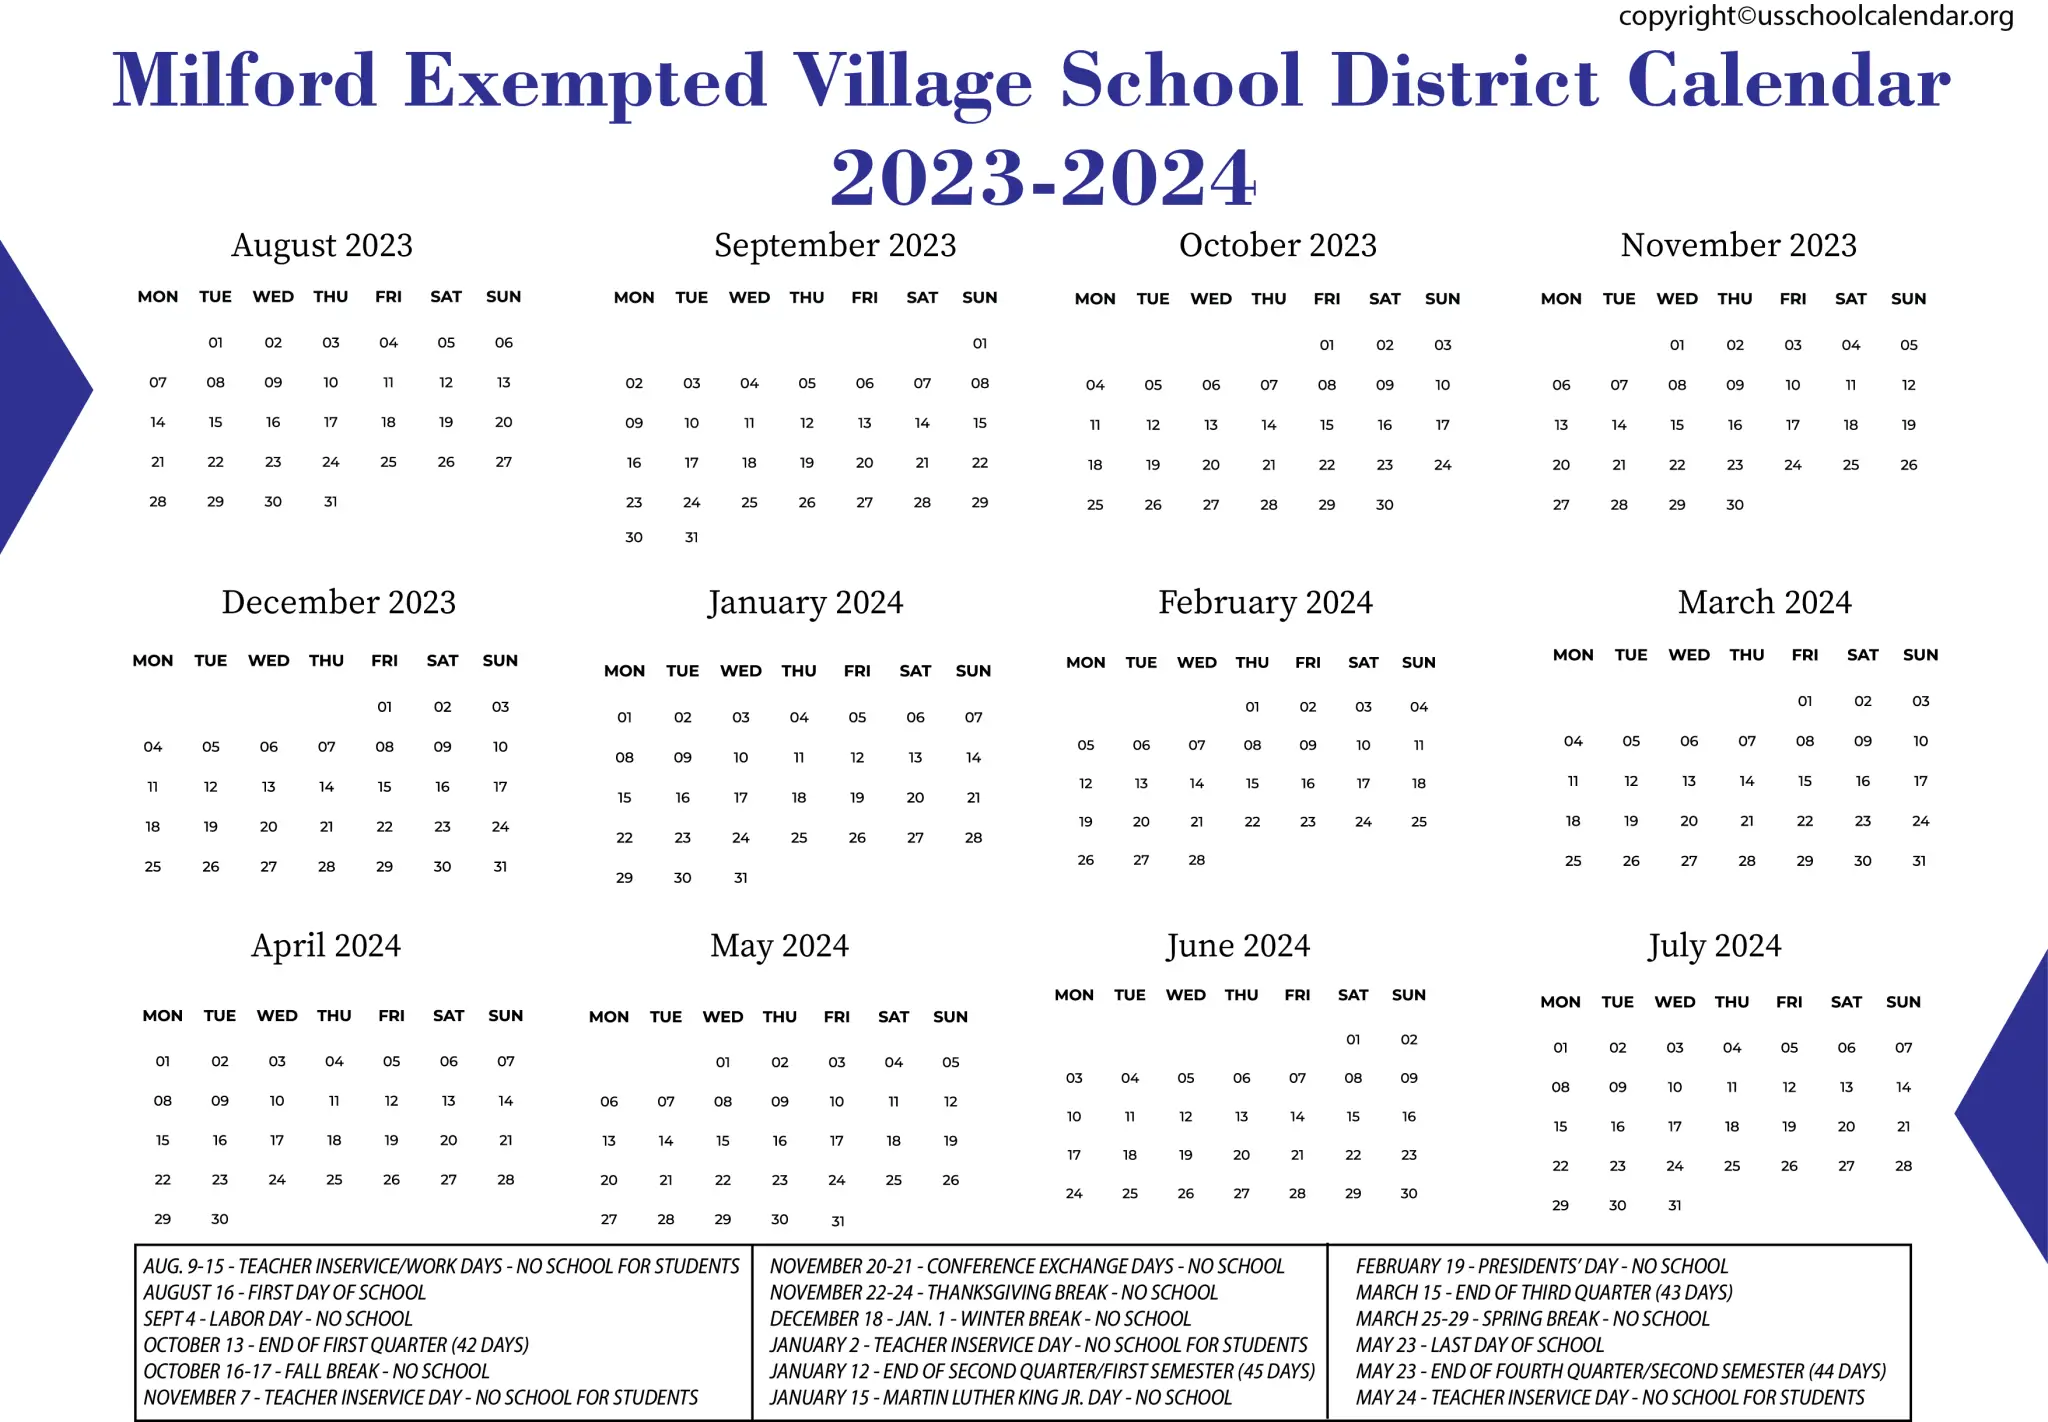 Milford Exempted Village School District Calendar for 2023-2024